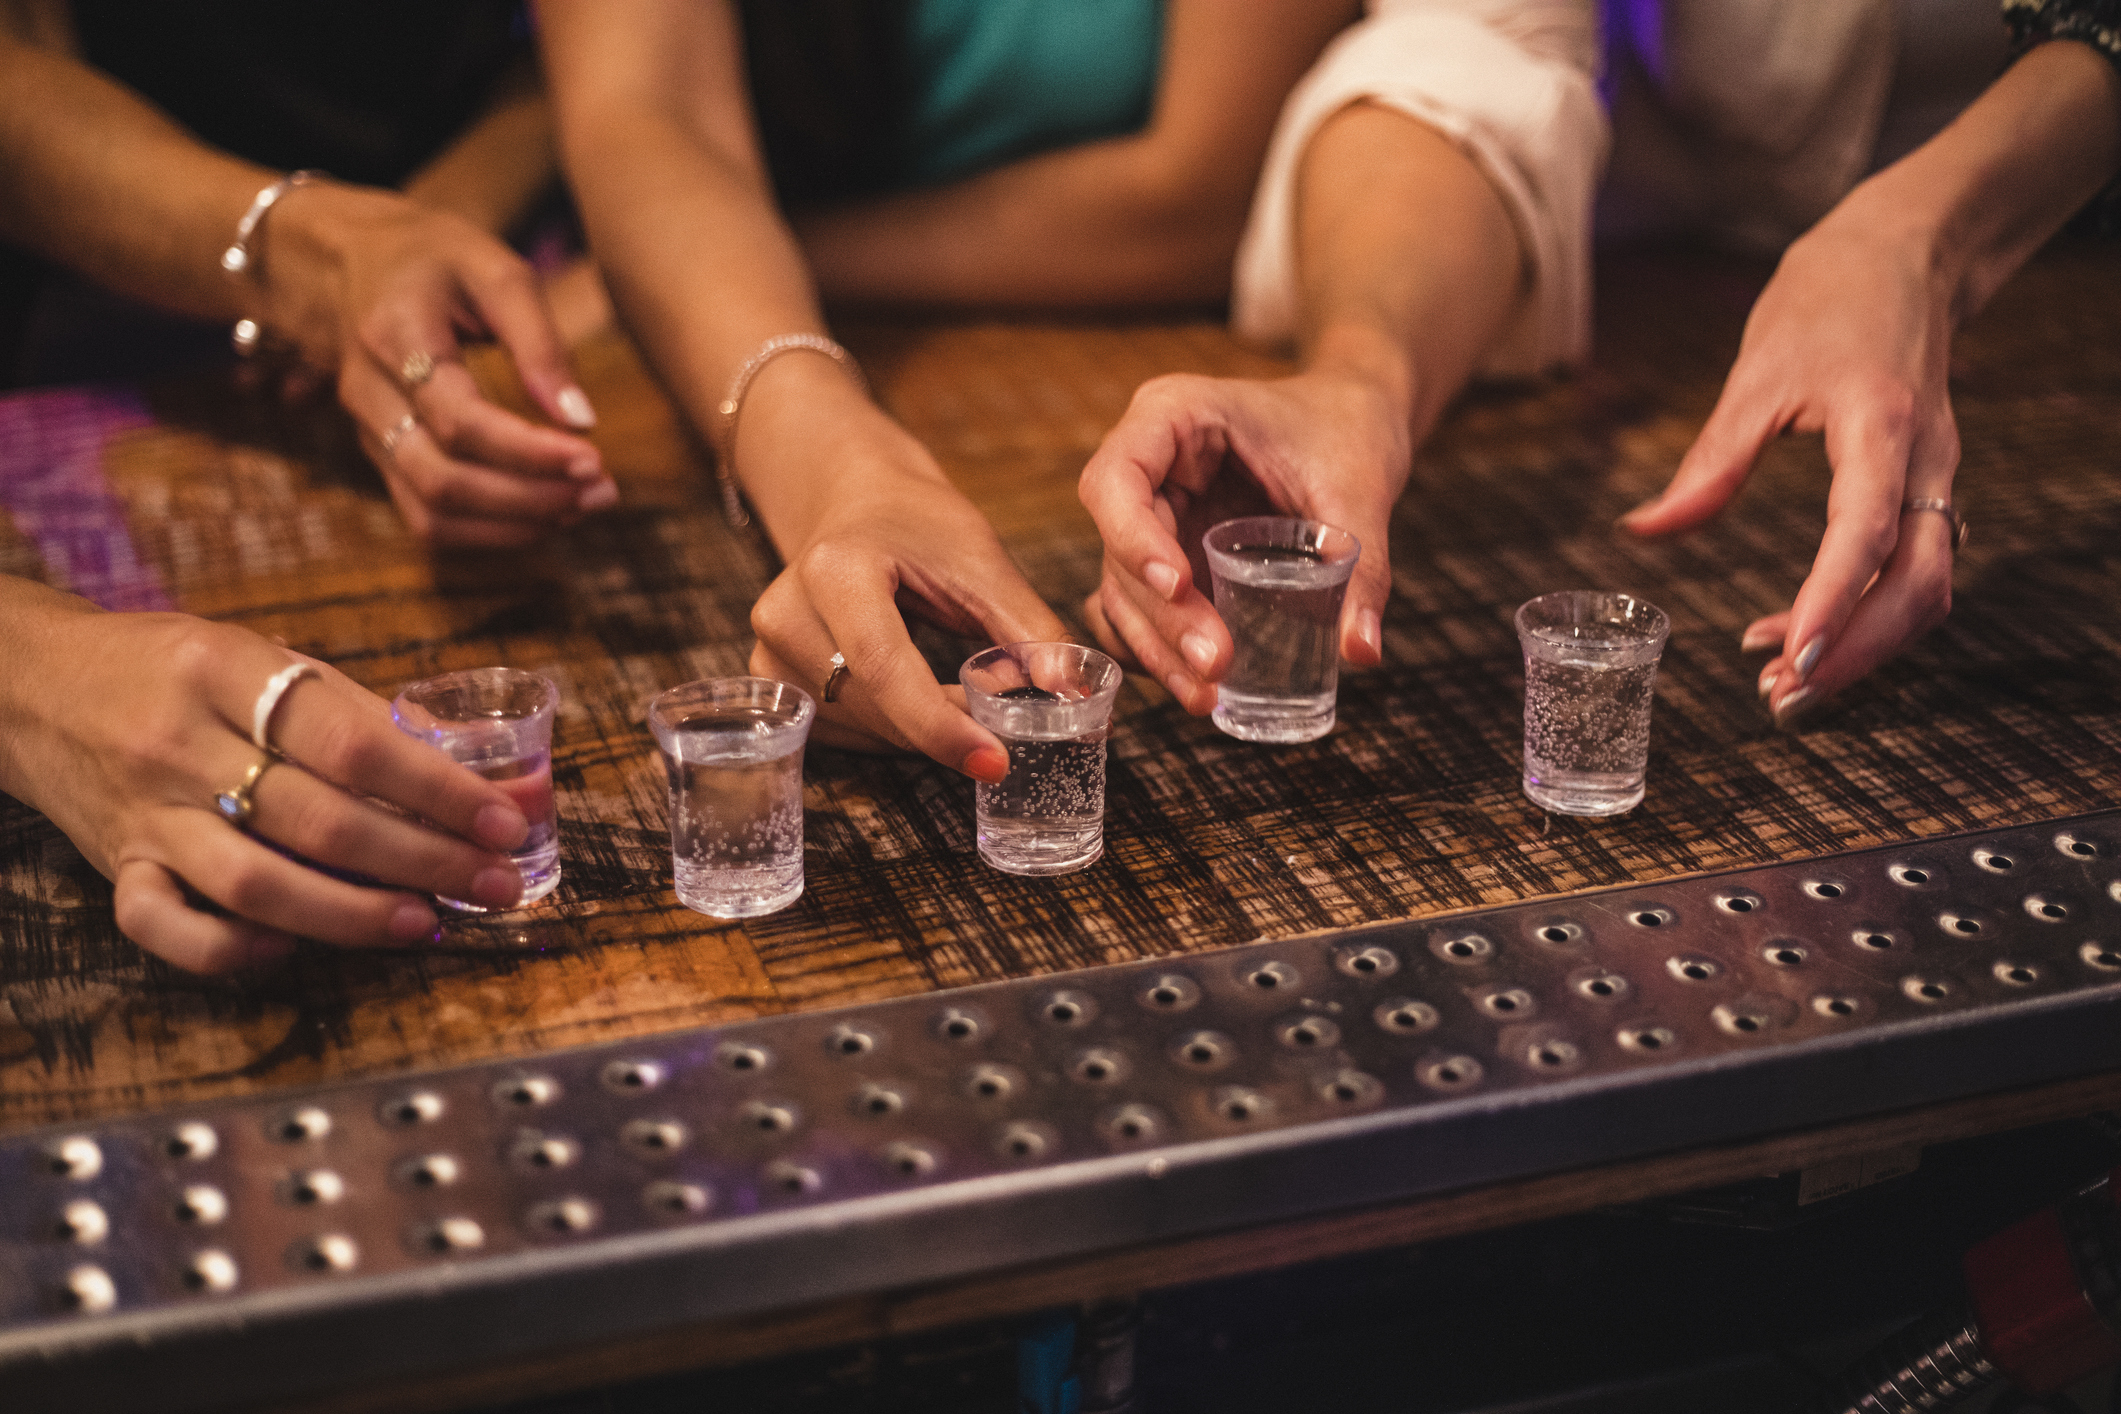 Several hands reaching for shot glasses on a bar counter